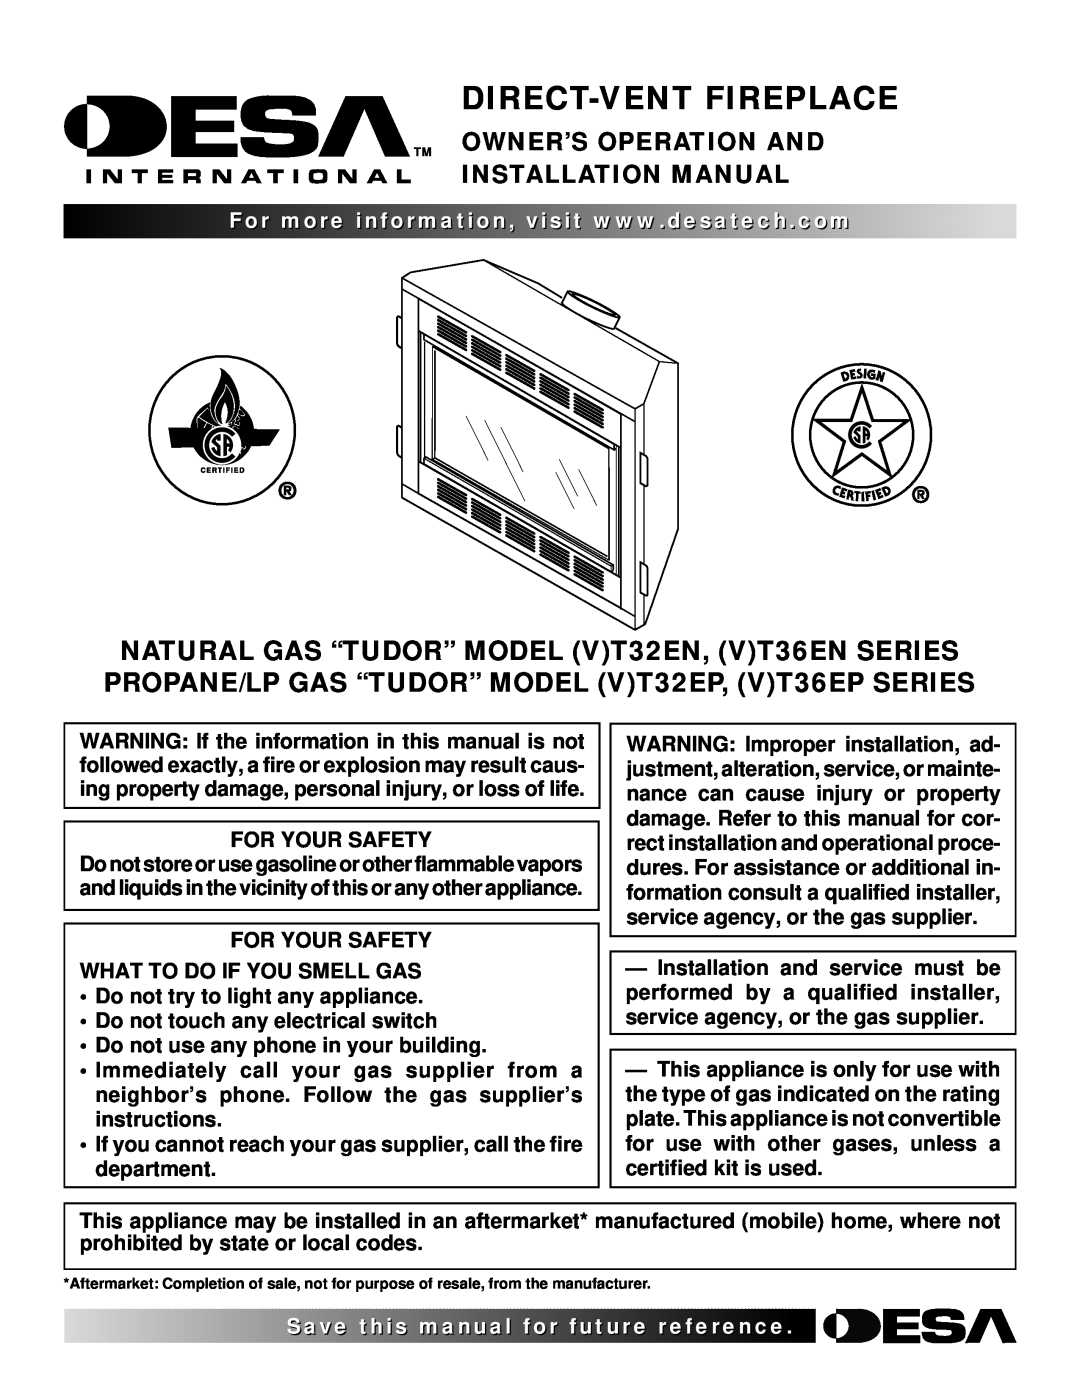 Desa (V)T36EN installation manual Direct-Ventfireplace, Save thisfor, Tm Owner’S Operation And Installation Manual 